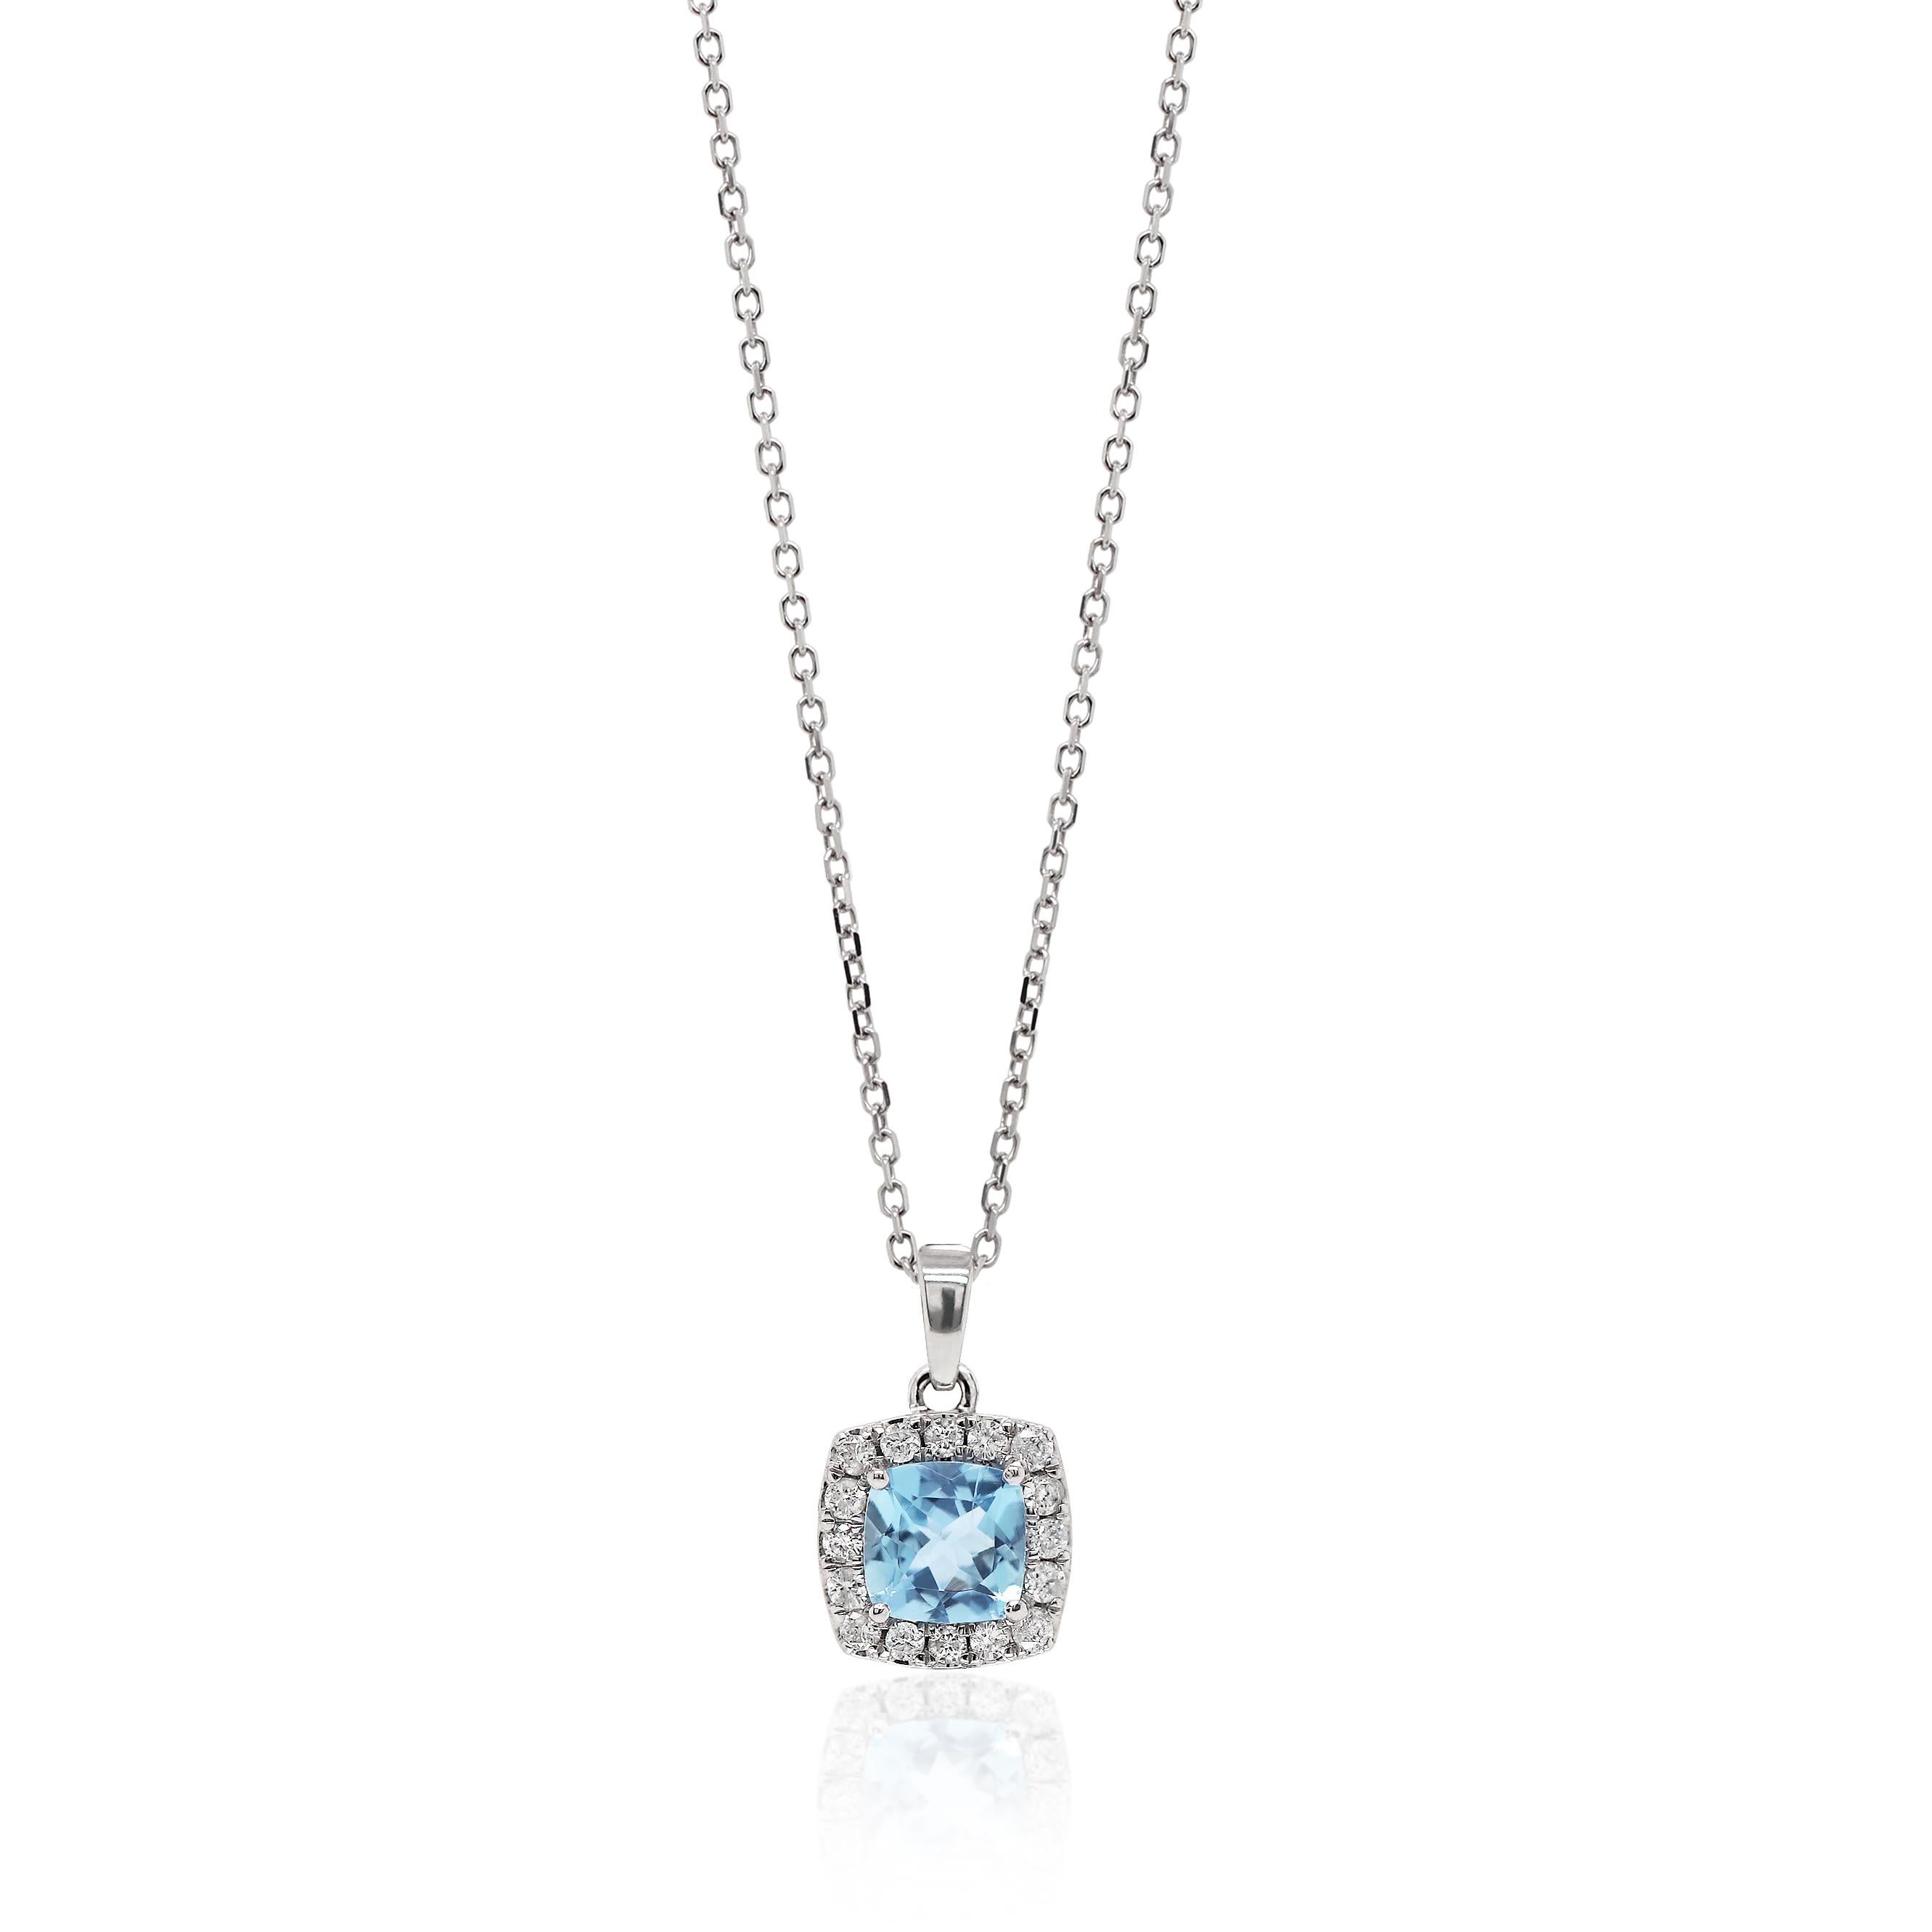 Pendant featuring a cushion shape aquamarine weighing 0.45ct claw set in an open back mount. 
The aquamarine is beautifully surrounded by 16 claw set fine quality round brilliant cut diamonds weighing a total of 0.14ct, all mounted in 18 carat white